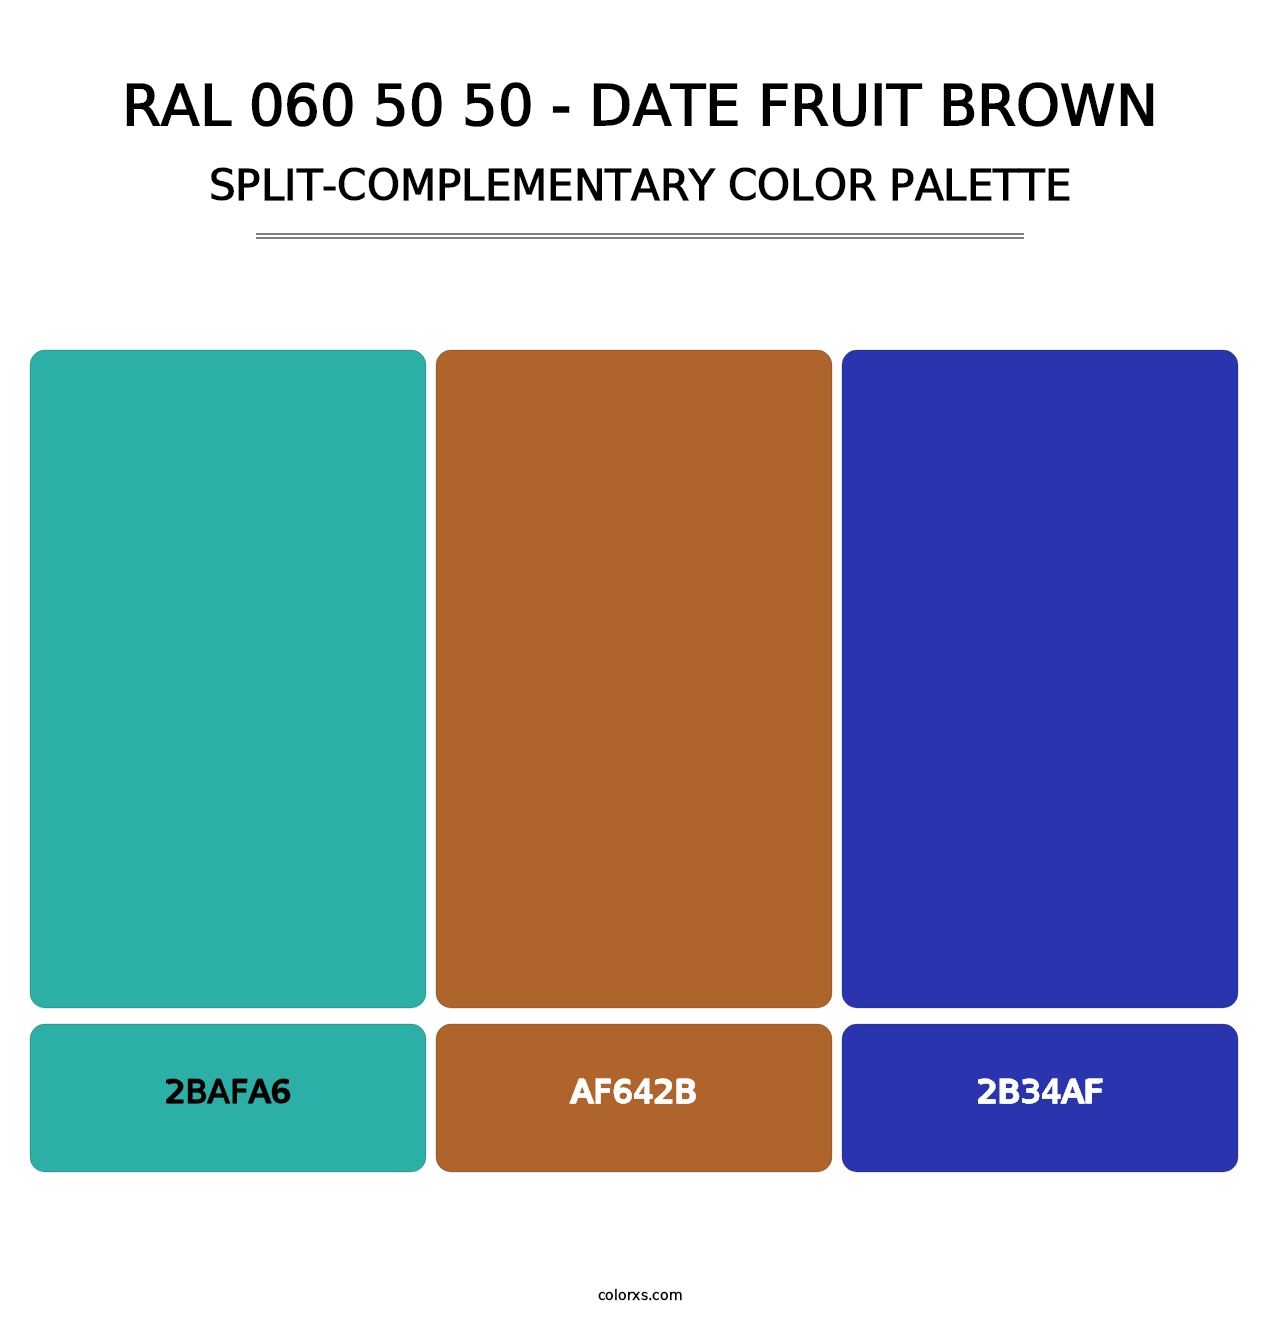 RAL 060 50 50 - Date Fruit Brown - Split-Complementary Color Palette